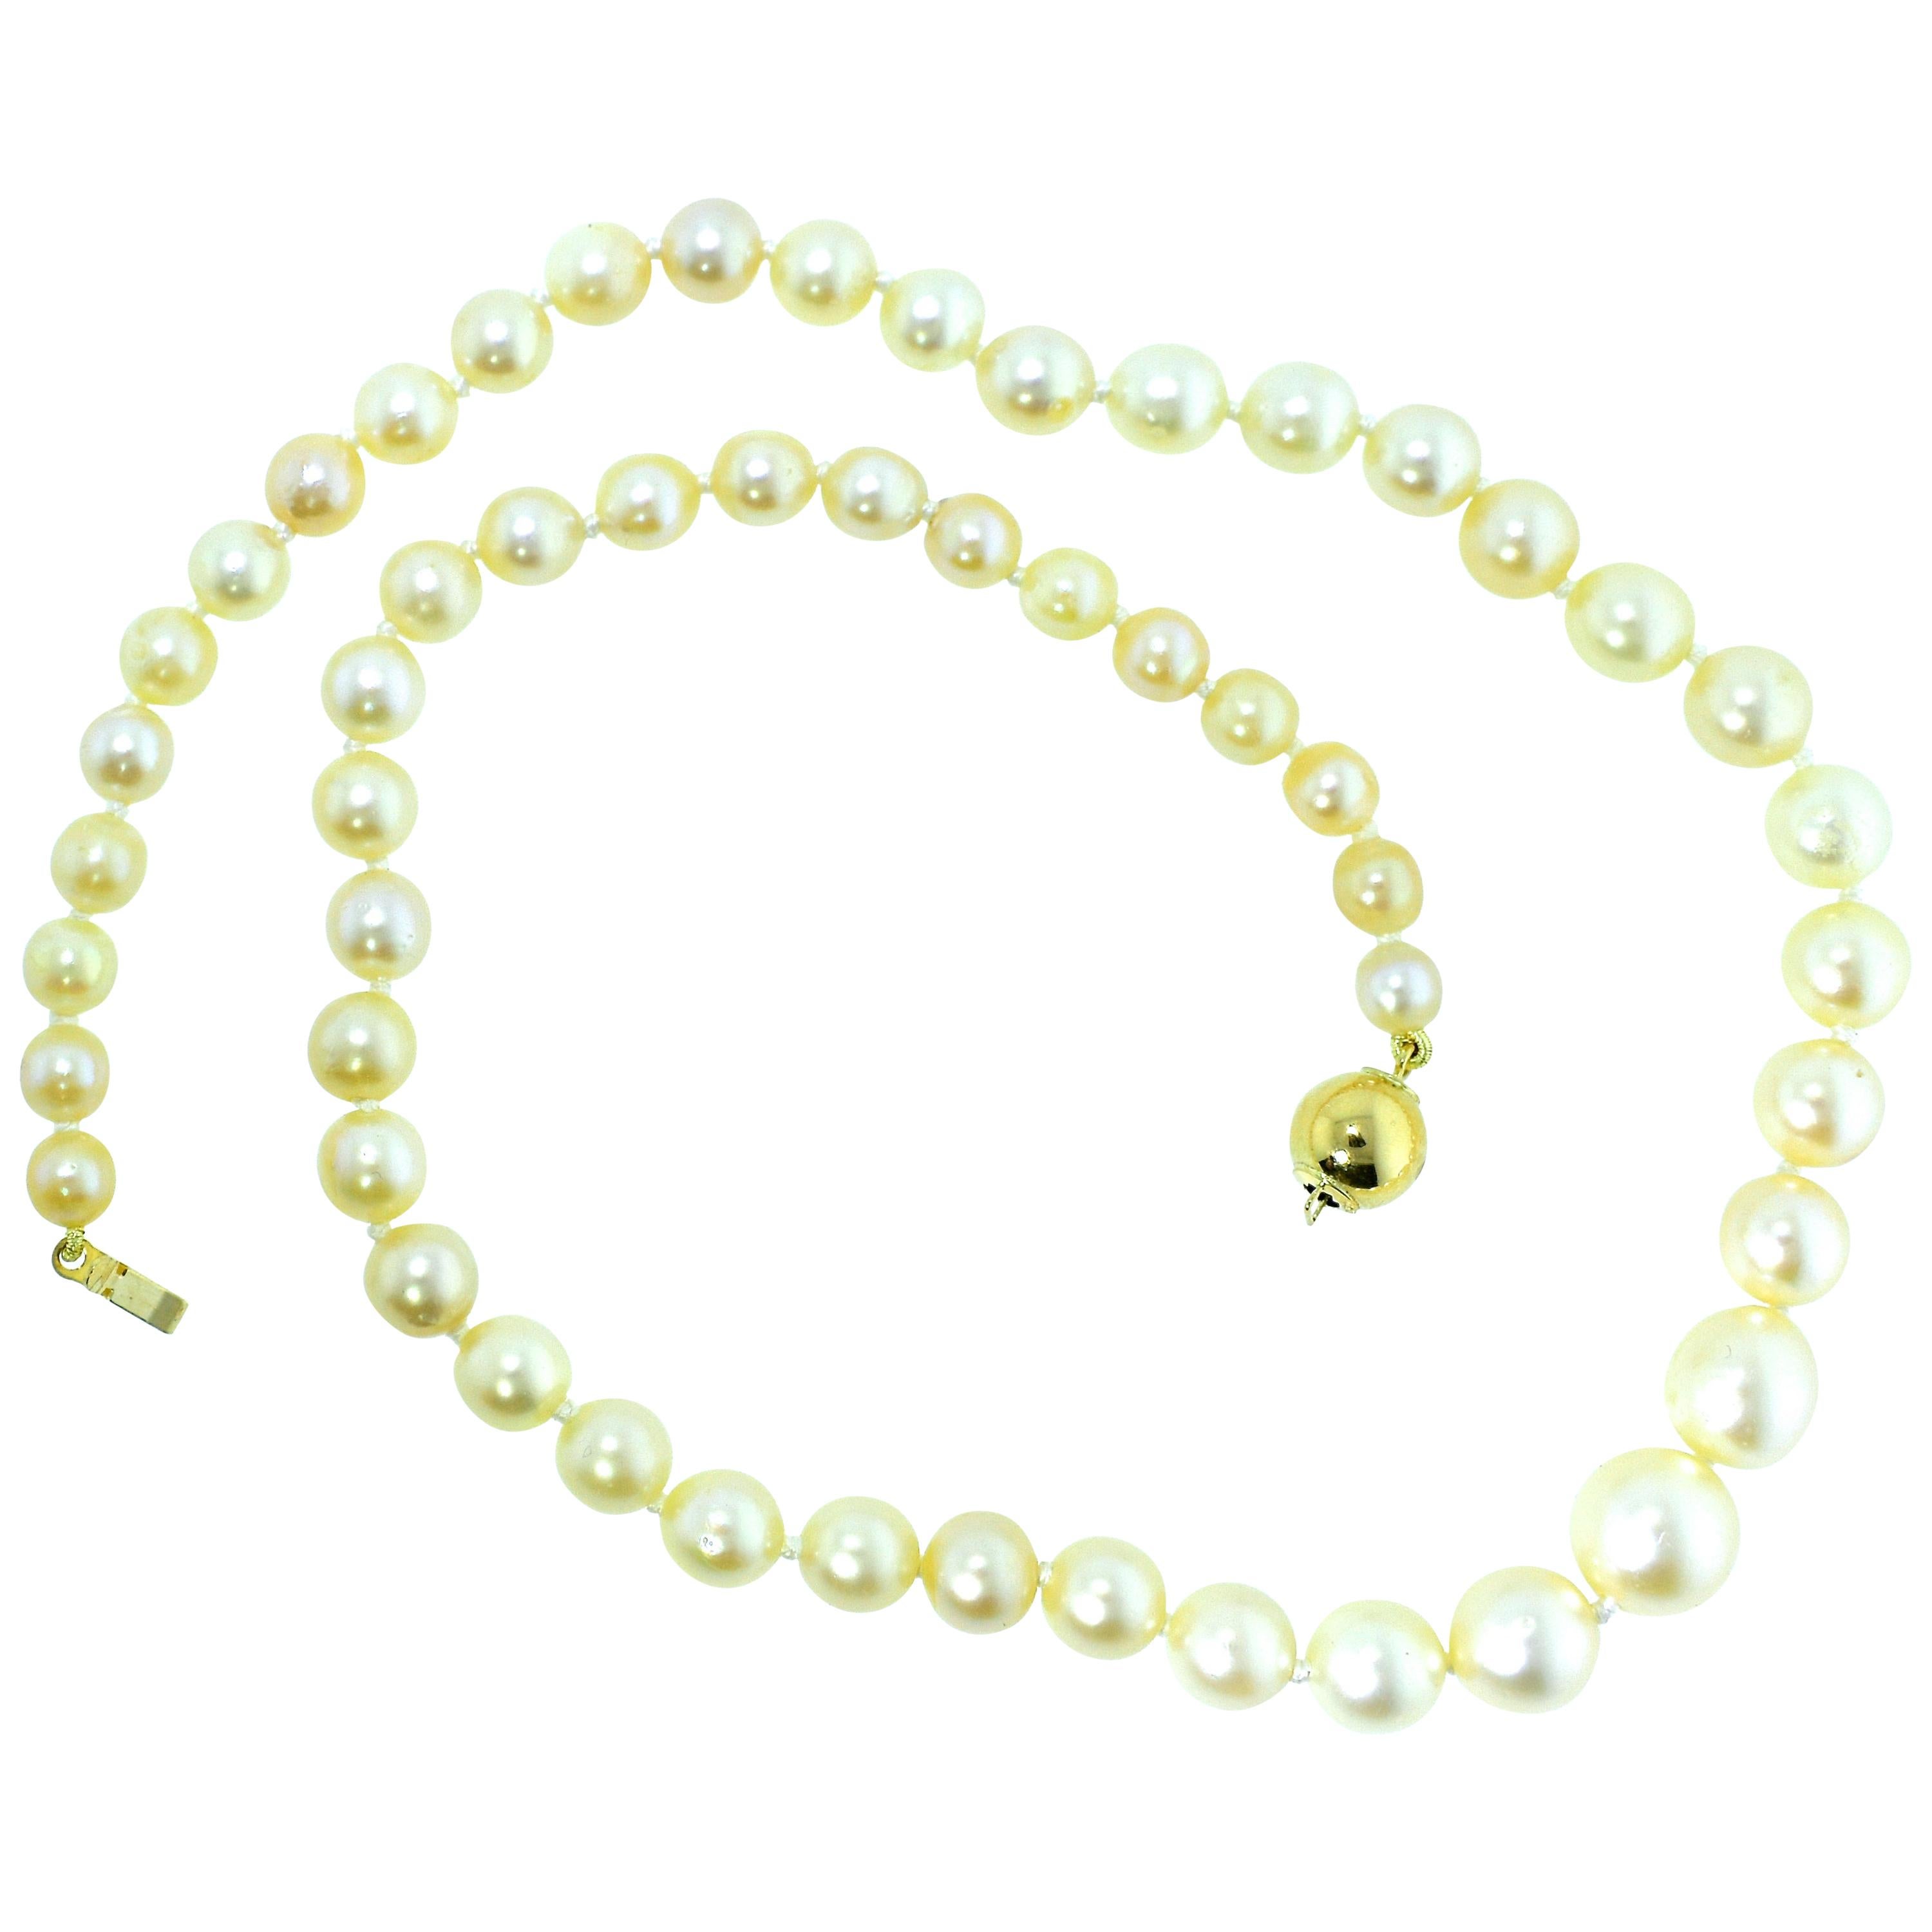 Fine strand of cultured pearls, 16 inches long, finished with a yellow gold clasp.  The 54 matching salt water, round pearls with fine luster, range in size from 5.25 mm. up to 9.37 mm.  These fine  pearls are recently strung and has been knotted